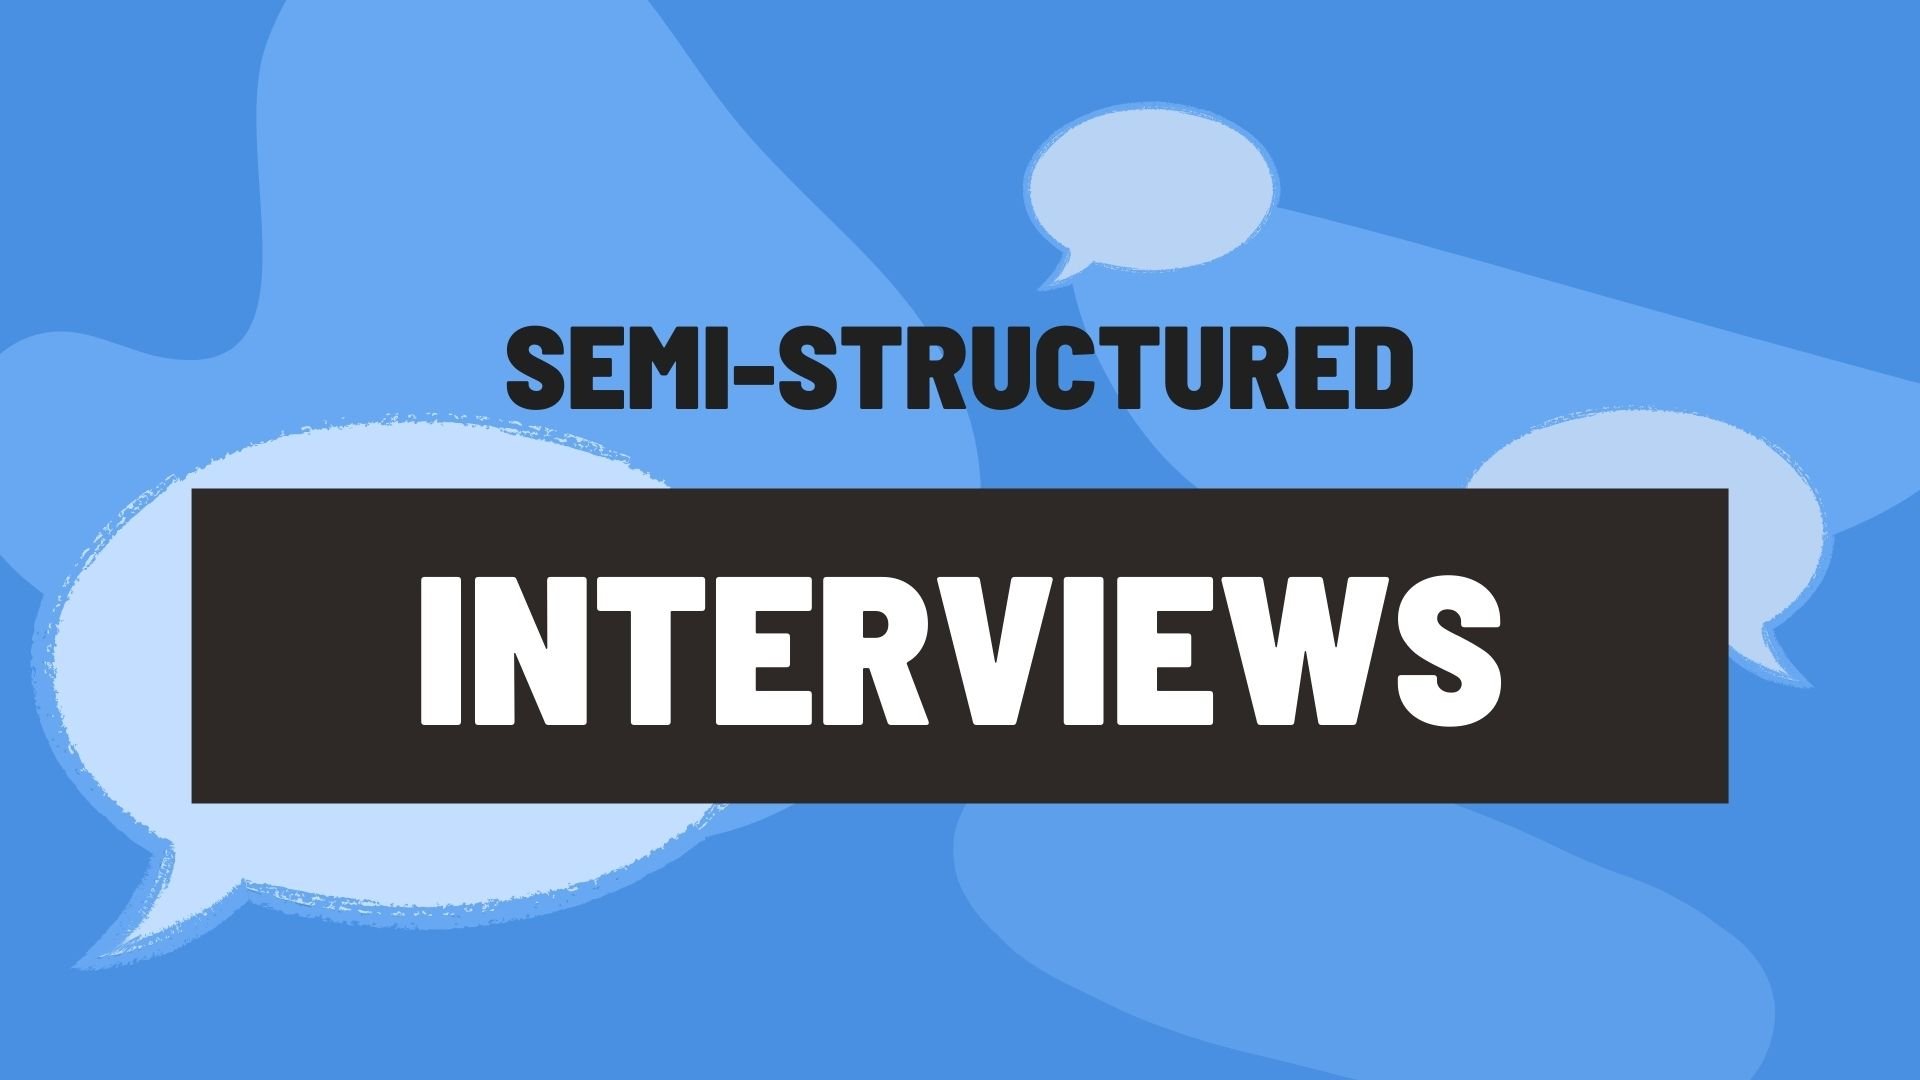 semi structured interview user research